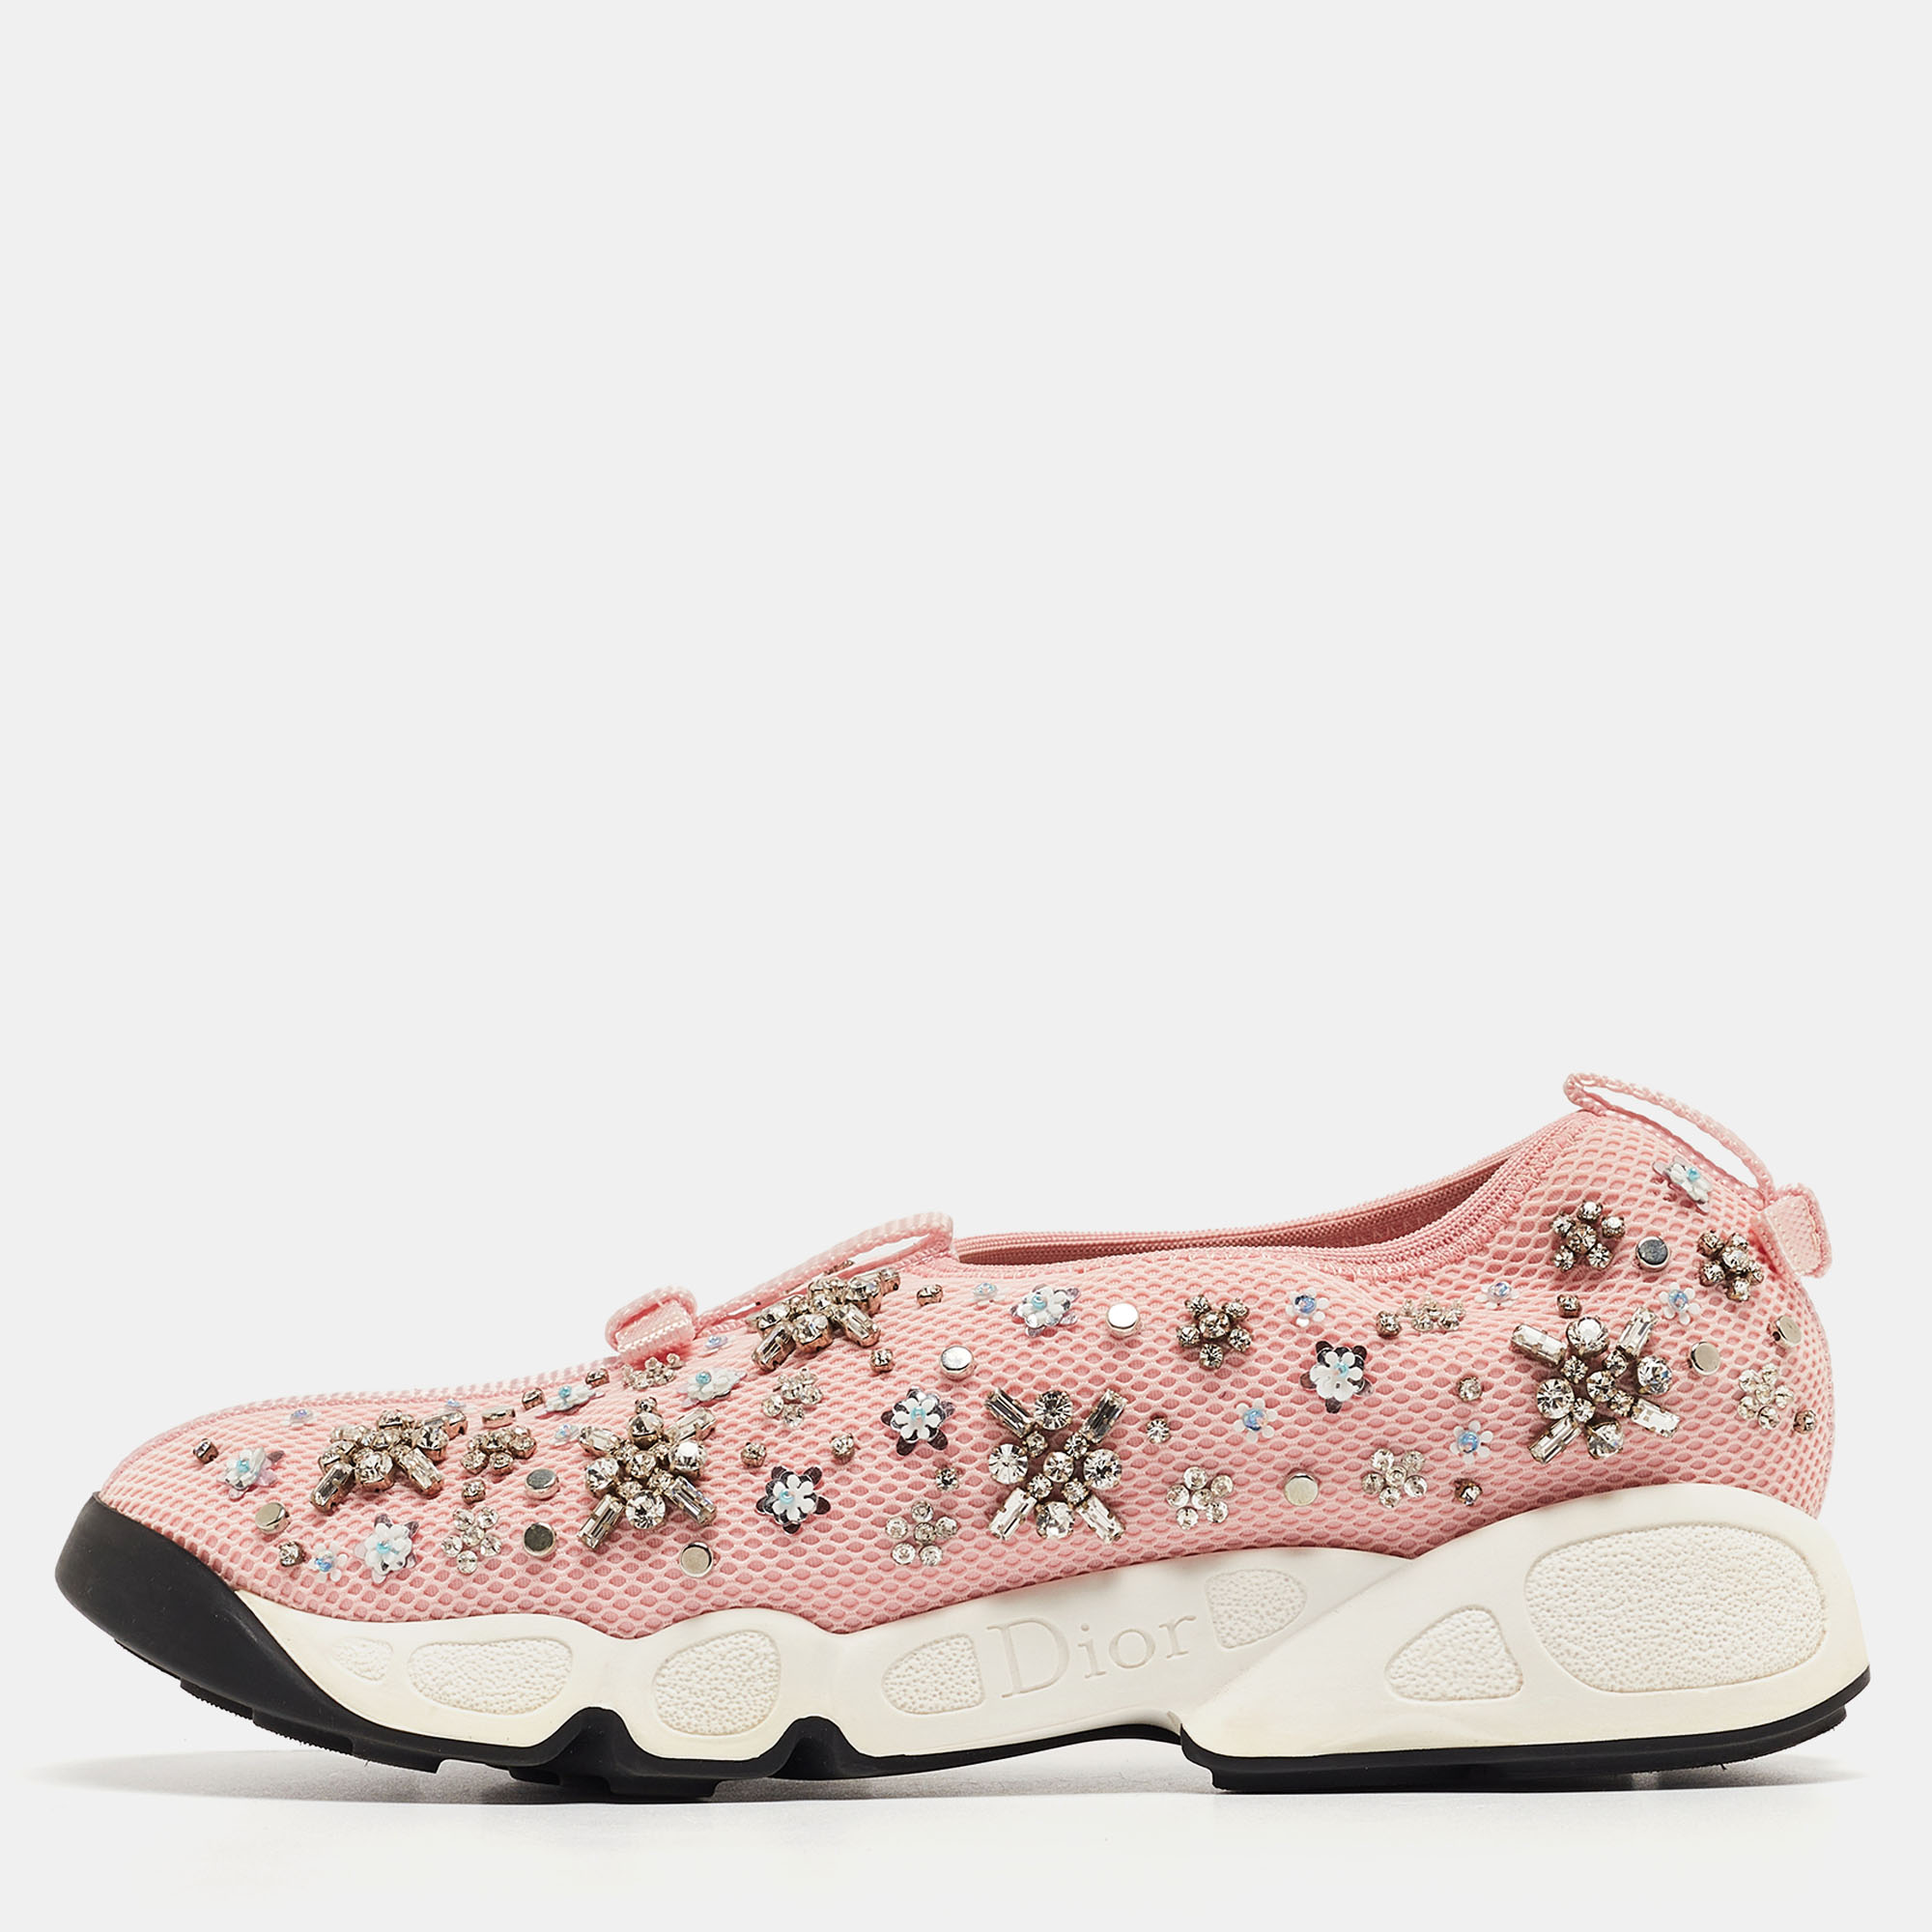 These Dior Fusion sneakers has the perfect amalgamation of a striking appeal and practical ease. Created beautifully from pink mesh it is decorated with attractive embellishments. The leather insoles and rubber soles makes sure these shoes ensures relaxed movement.